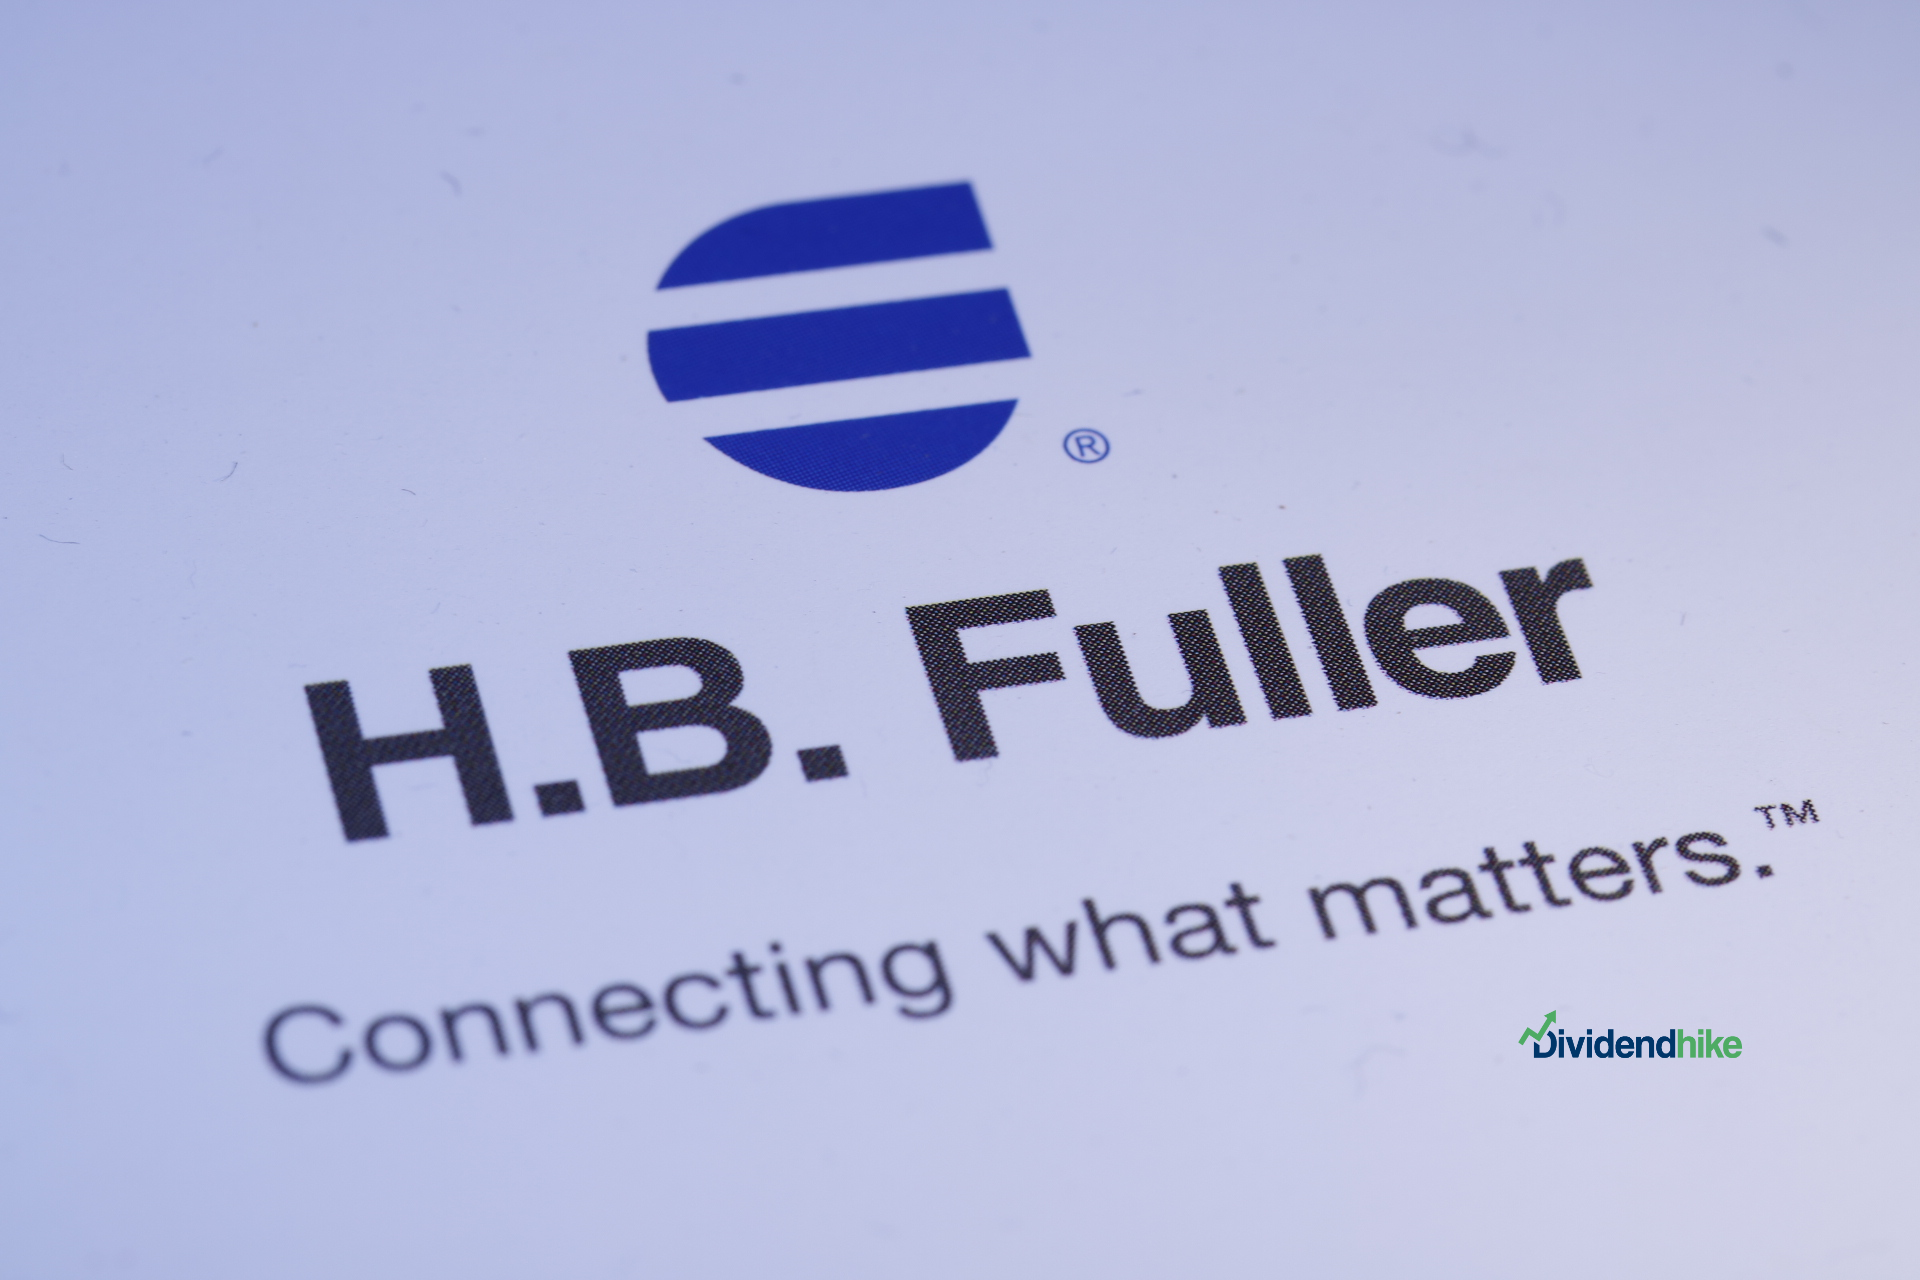 H.B. Fuller hikes dividend by 20%